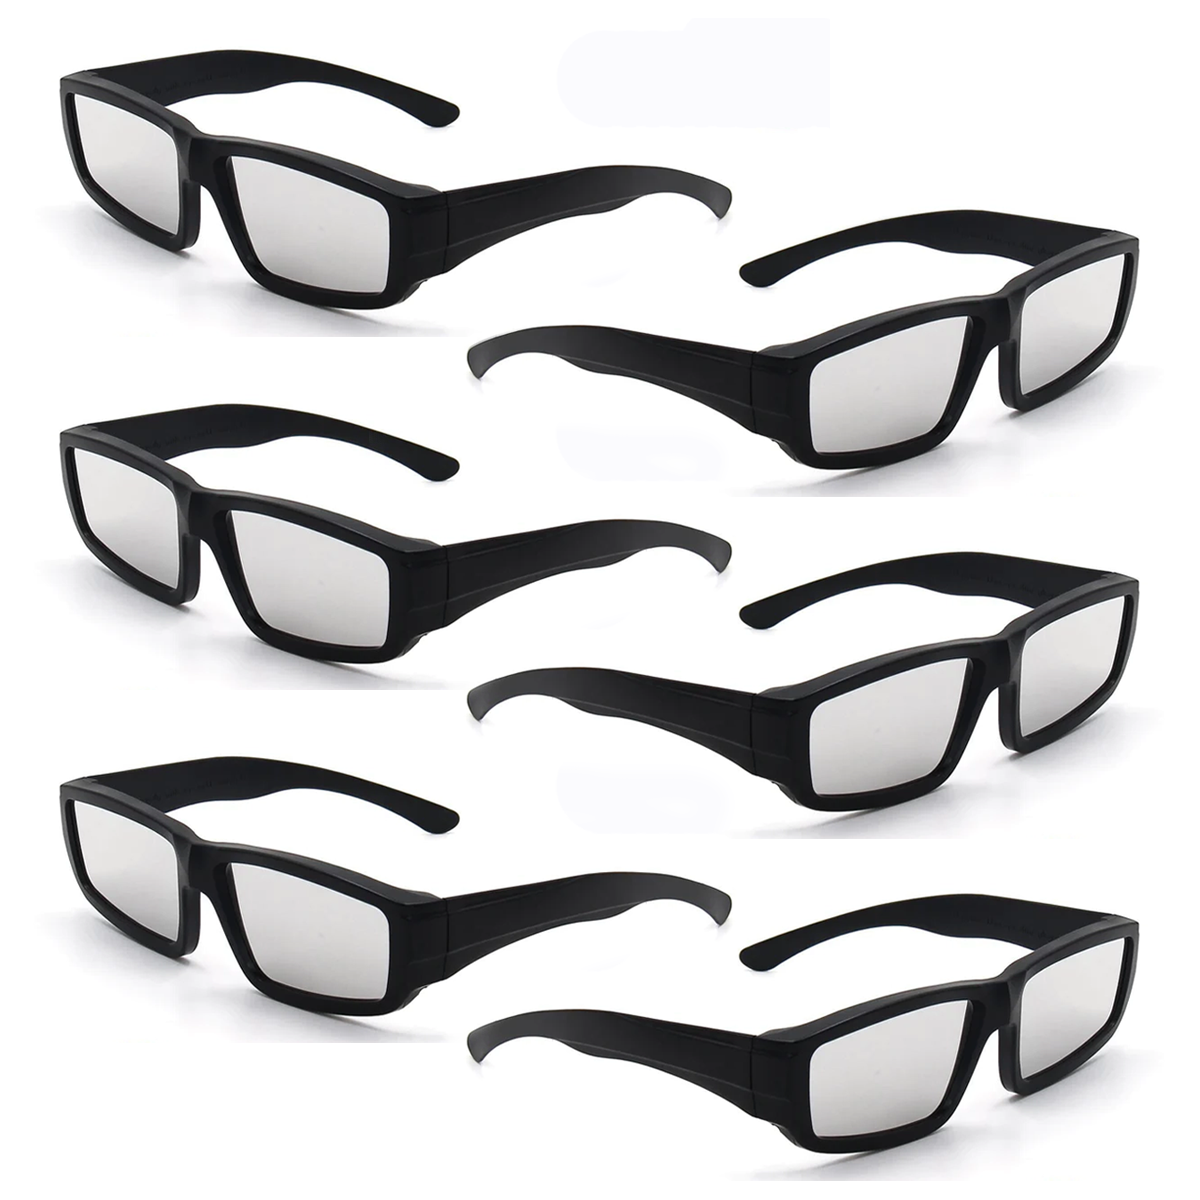 SEIC Plastic Solar Eclipse Glasses, CE and ISO Certified Eclipse Shade for Direct Sun Viewing (Pack of 6 Black)